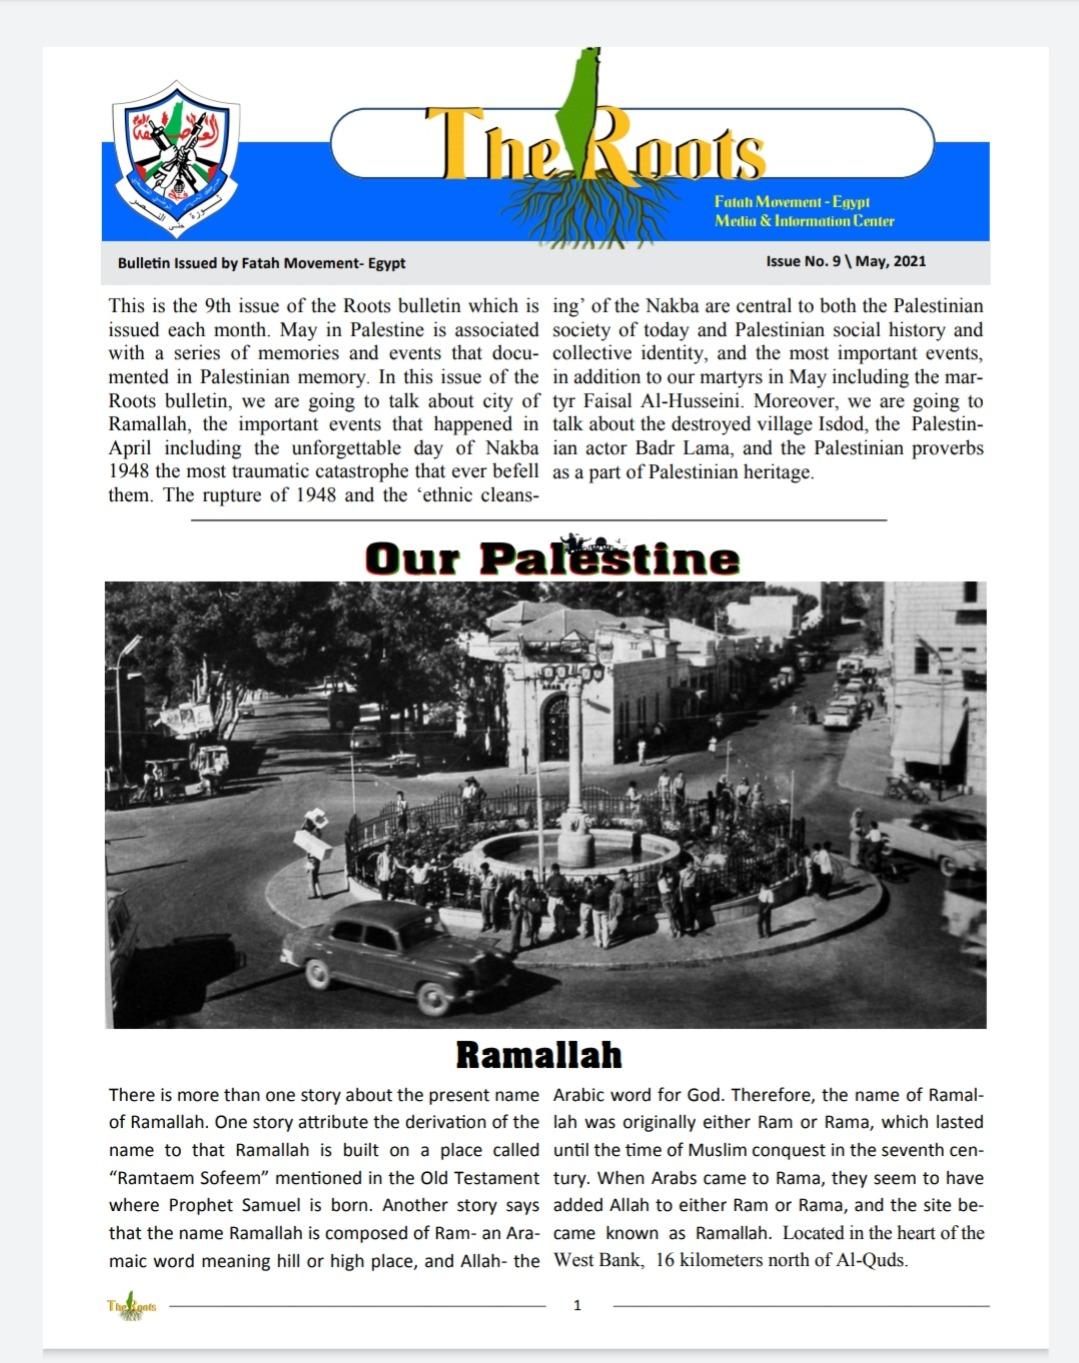 The Roots Bulletin (Issue No.9)